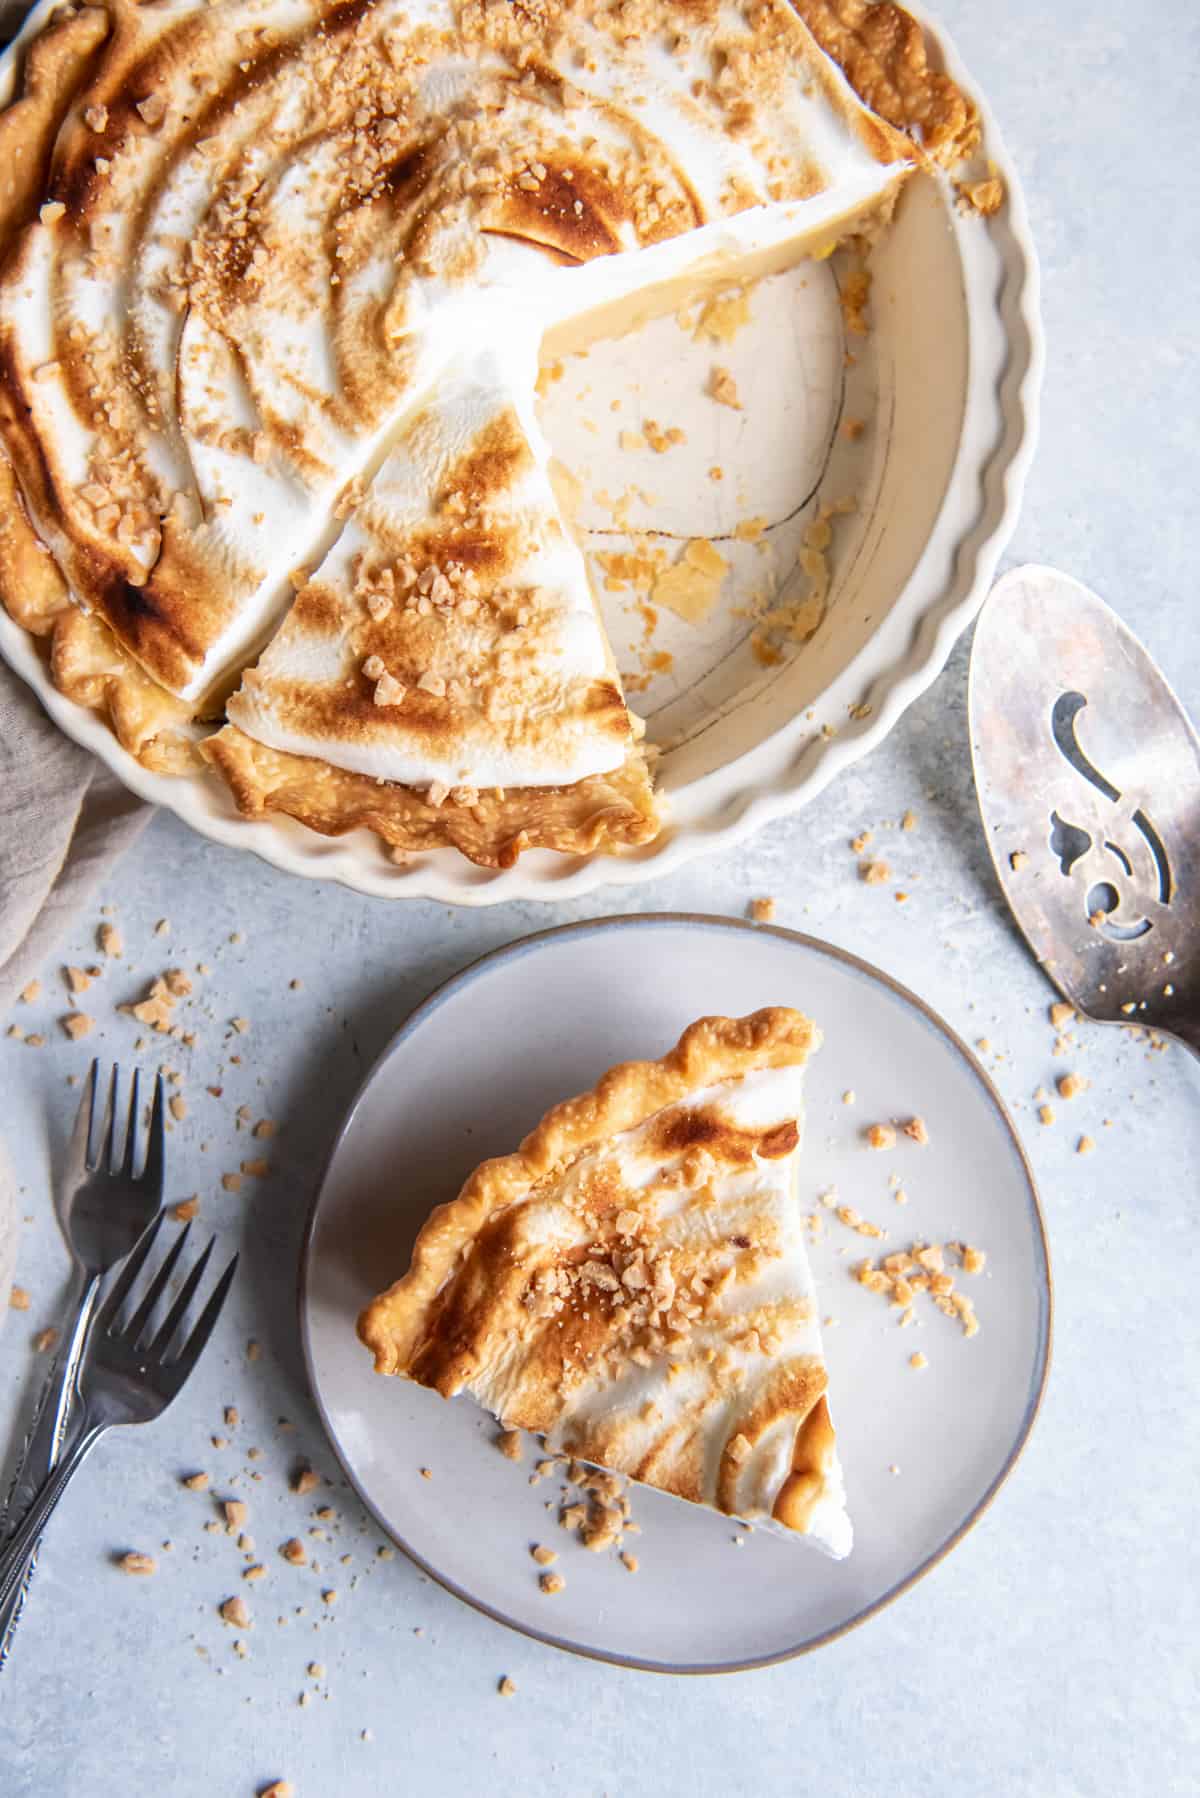 a slice of butterscotch pie on a plate, next to the whole pie